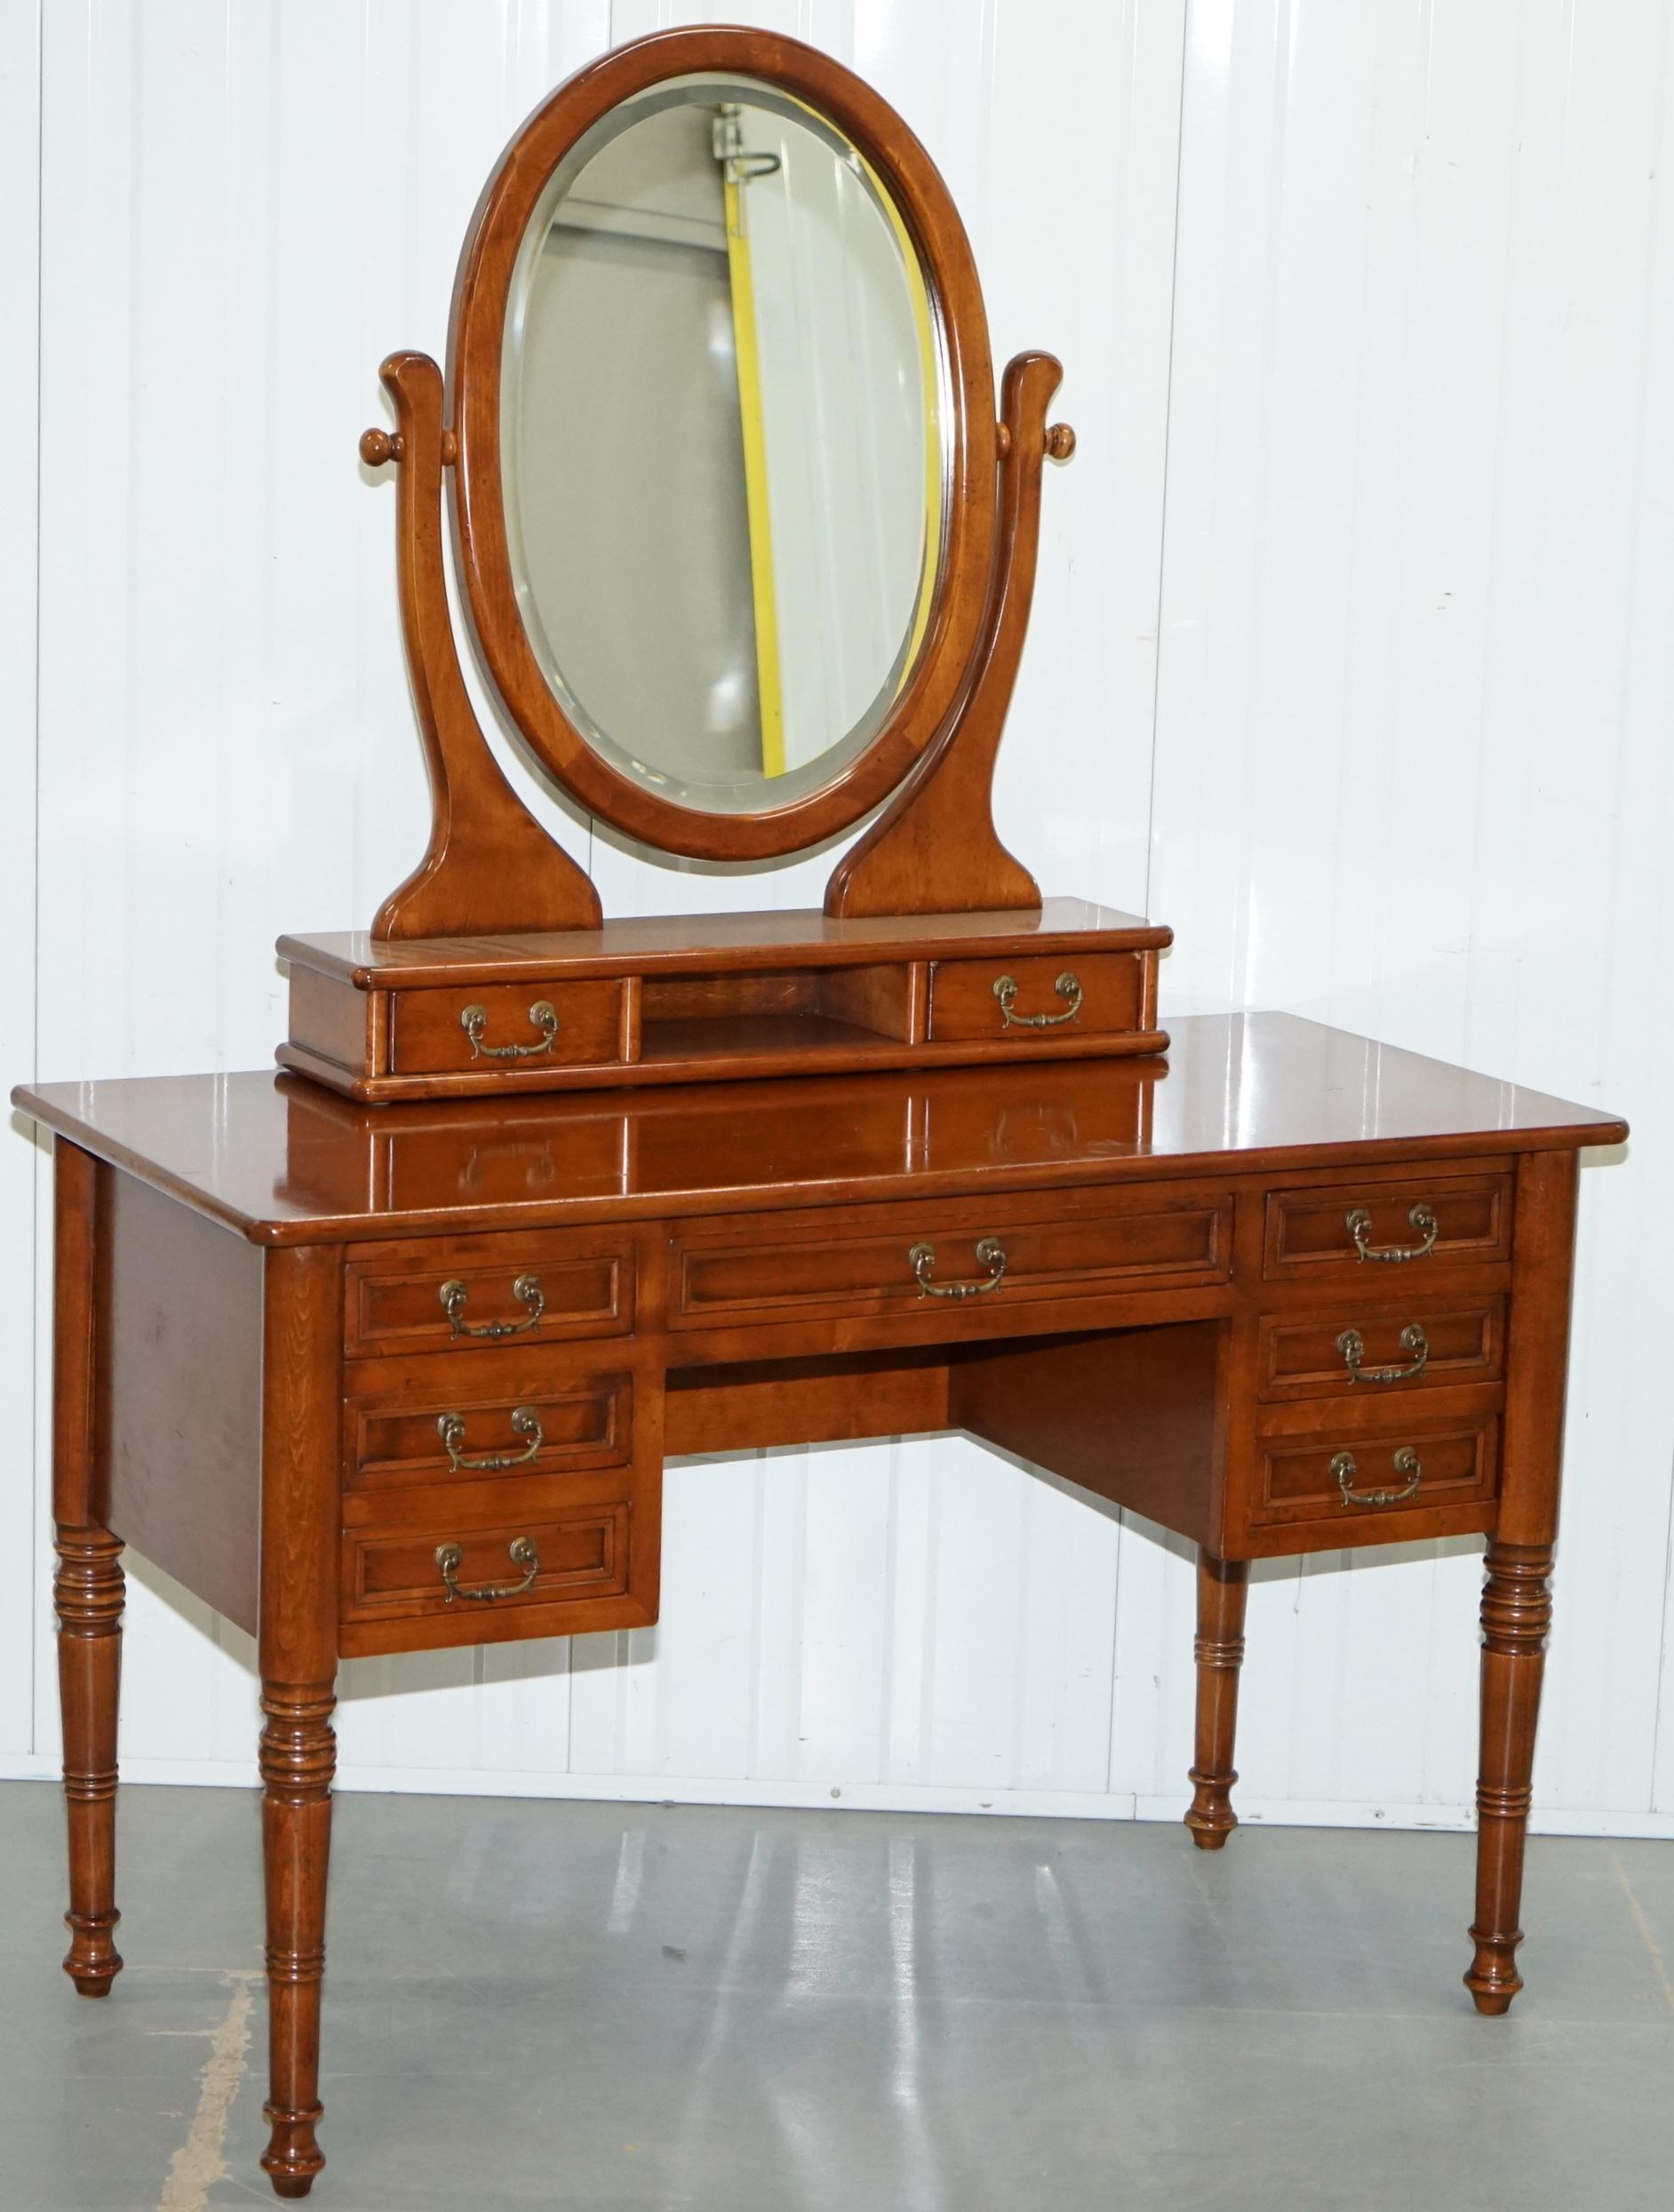 We are delighted to offer for sale this lovely handmade in Italy Consorzio Mobili dressing table mirror and stool

This is part of a large suite, I have the matching tall boy drawers, wall mirror, bedside tables and sleigh bed all listed under my